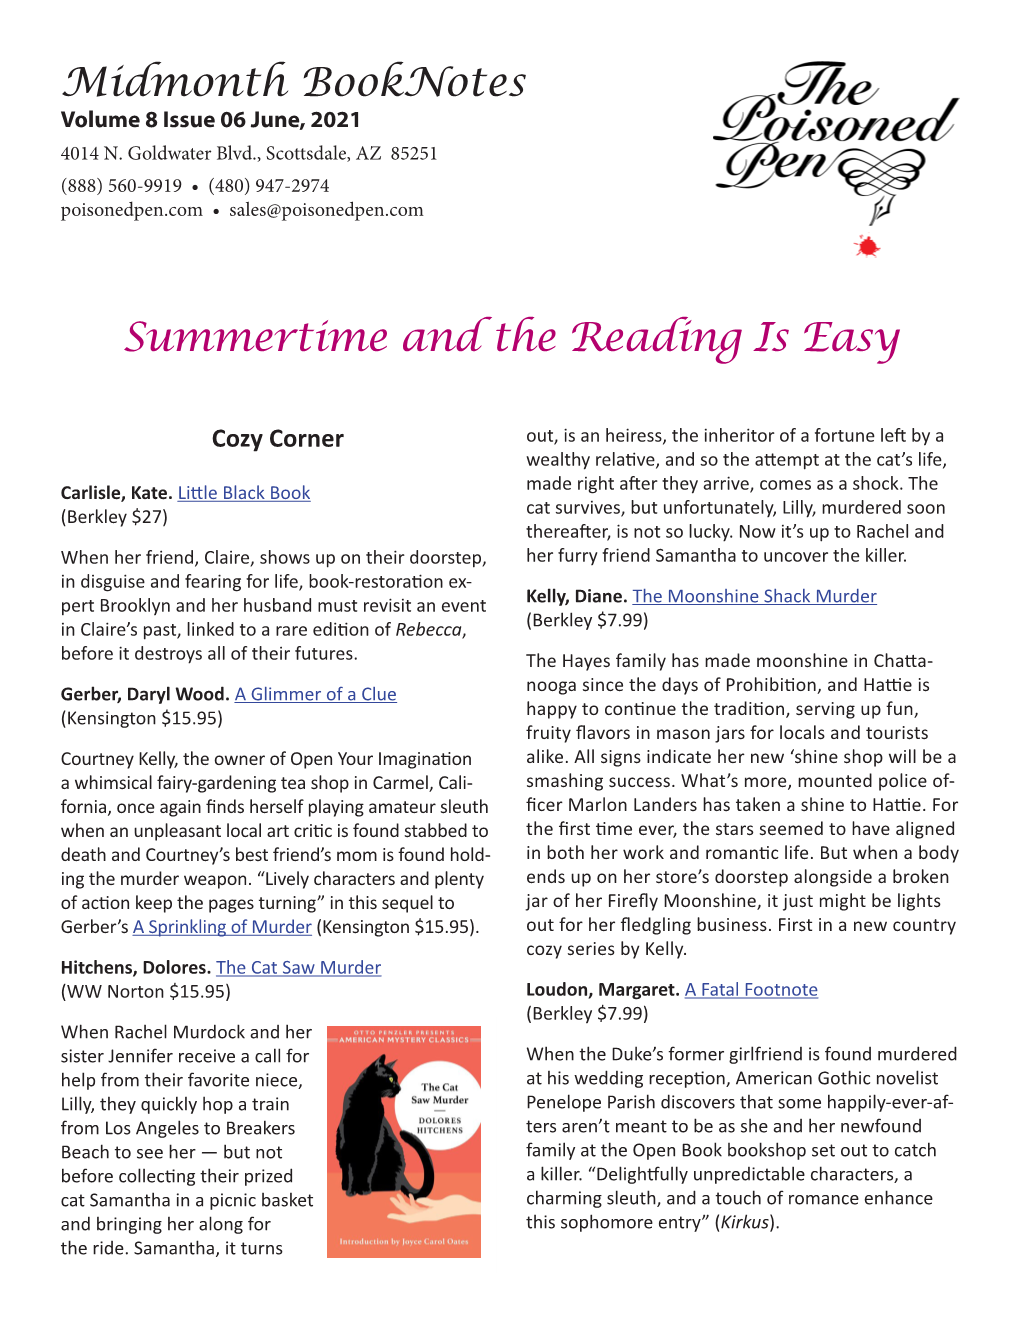 Midmonth Booknotes Summertime and the Reading Is Easy